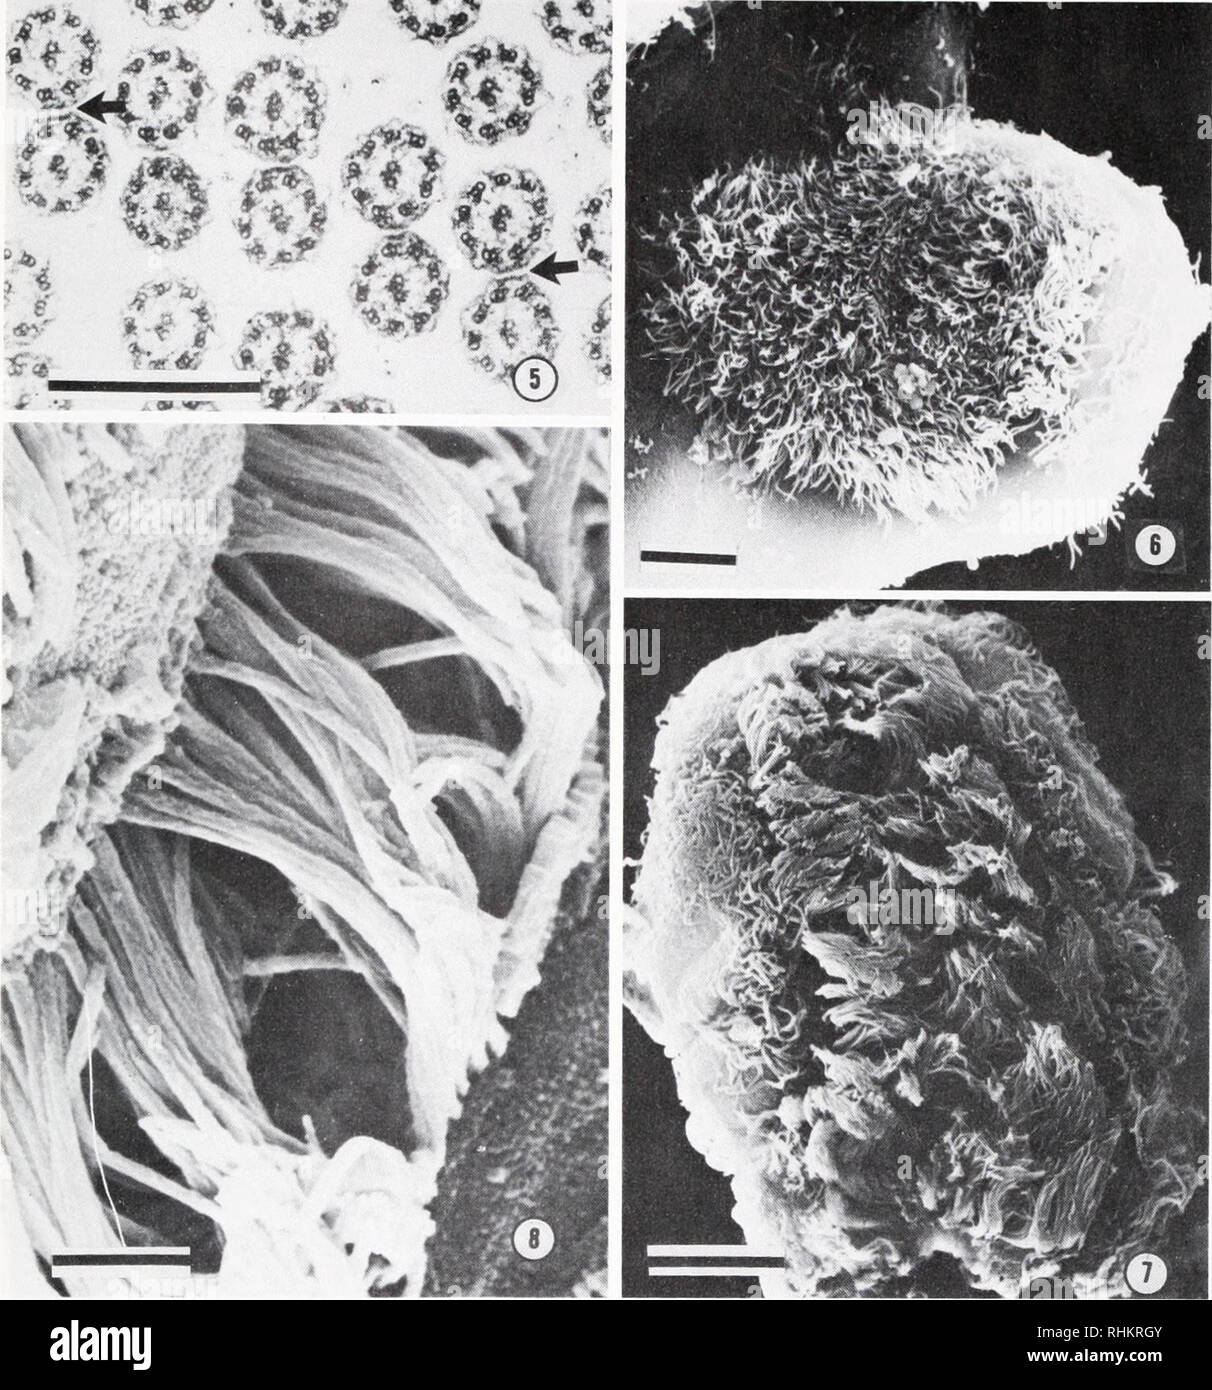 . The Biological bulletin. Biology; Zoology; Biology; Marine Biology. SCALLOP GILL CILIARY JUNCTIONS 231 r *** ^* ^ 54 ^00;.,0« f. FIGURE 5. A transmission electron micrograph of a cross section through an intact junction, showing the pairing of the J-cilia and the electron-dense band underlying the ciliary membrane (arrow). Bar = 500 nm. FIGURE 6. An untreated, control cilifer showing the unpatterned arrangement of the junctional cilia over the surface. Bar = 10 ^m. FIGURE 1. A cilifer after exposure to 10 Mg/ml cytochalasin E for one hour. Note the tufting of the J-cilia. Compare with Figur Stock Photo